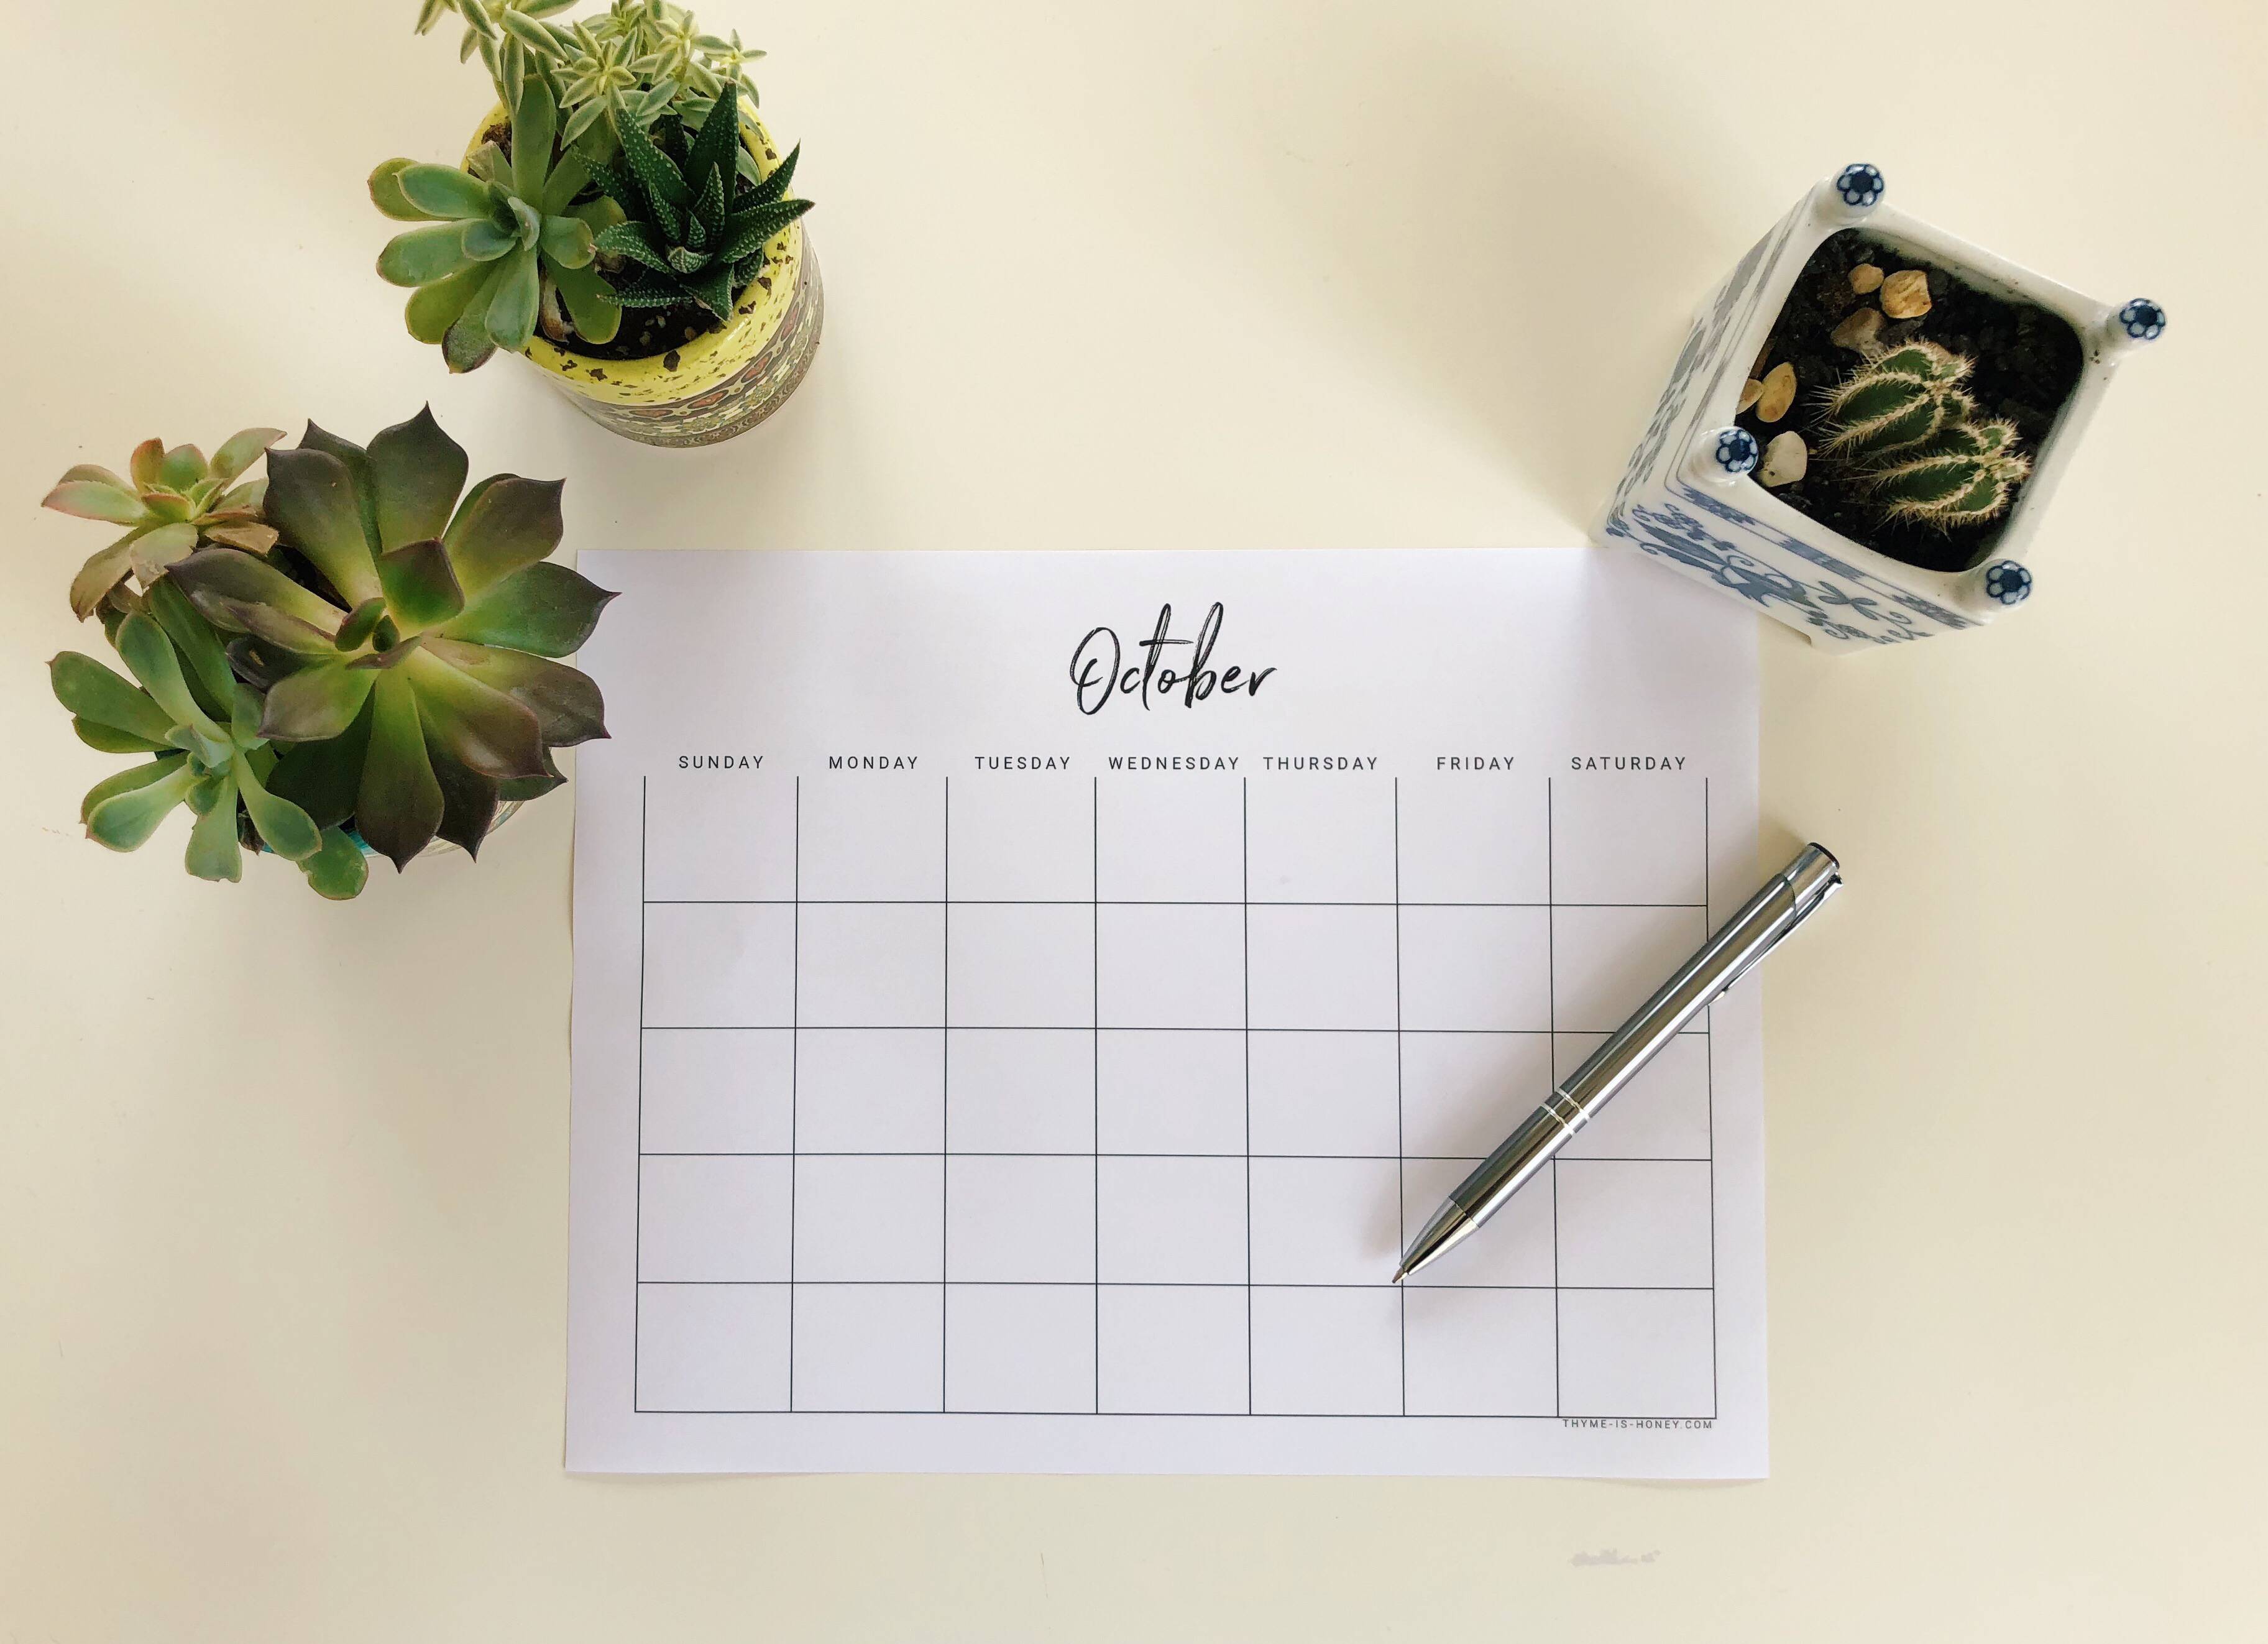 A monthly calendar from October. Calendars and planners are excellent organizational tools that can help reduce stress at work through better planning.